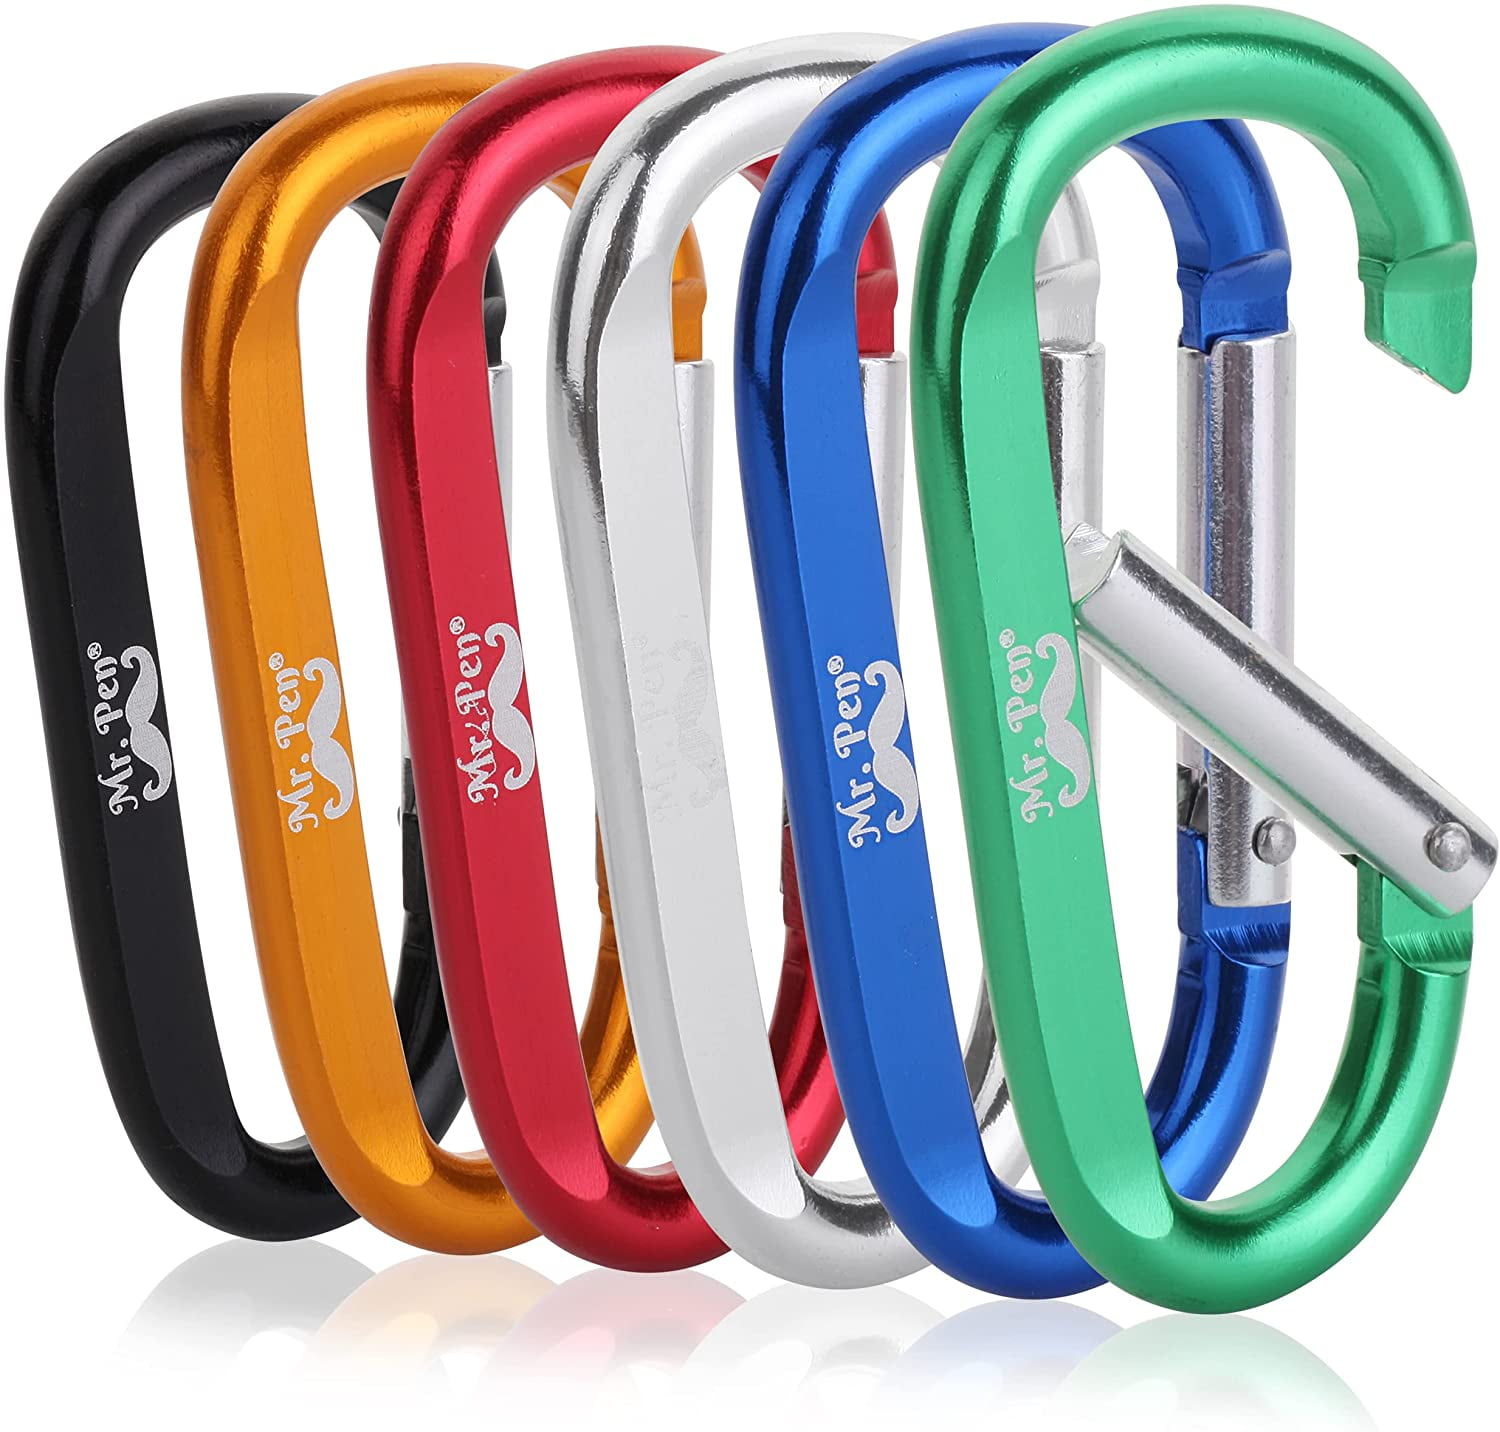 5X Aluminum'Alloy Carabiner D-Ring Key Chain Keychain Clip Hook Buckle OutdoorDP 